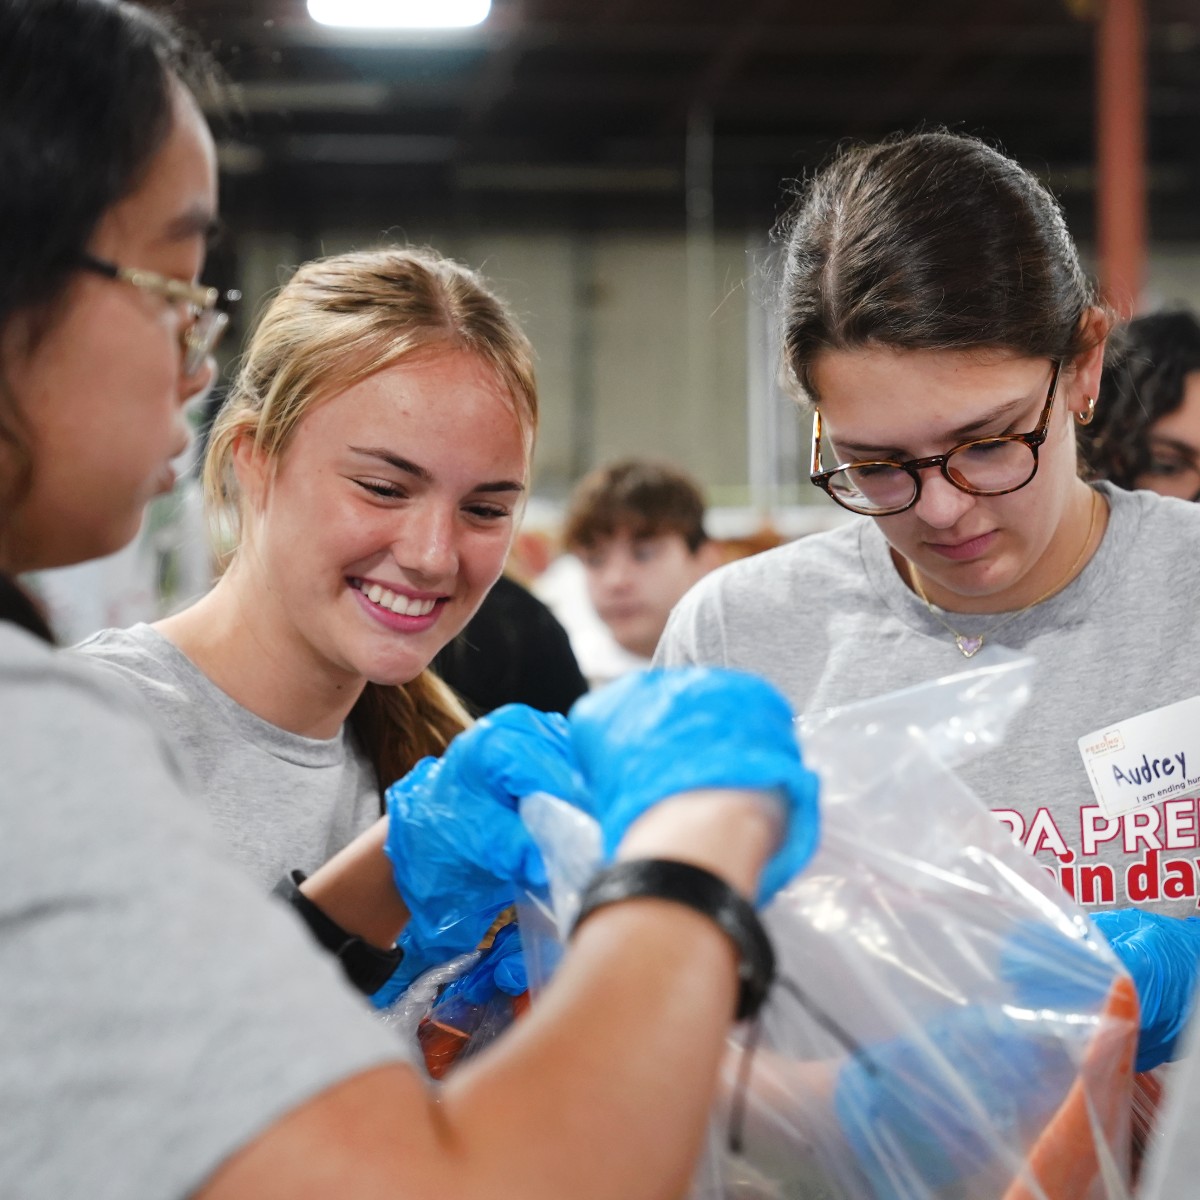 Are you interested in volunteering with Feeding Tampa Bay? With the new Causeway Center, you and your friends will have even more opportunities to impact our community as we now can accommodate 150+ volunteers during each shift. Learn more here: bit.ly/3xpKUID